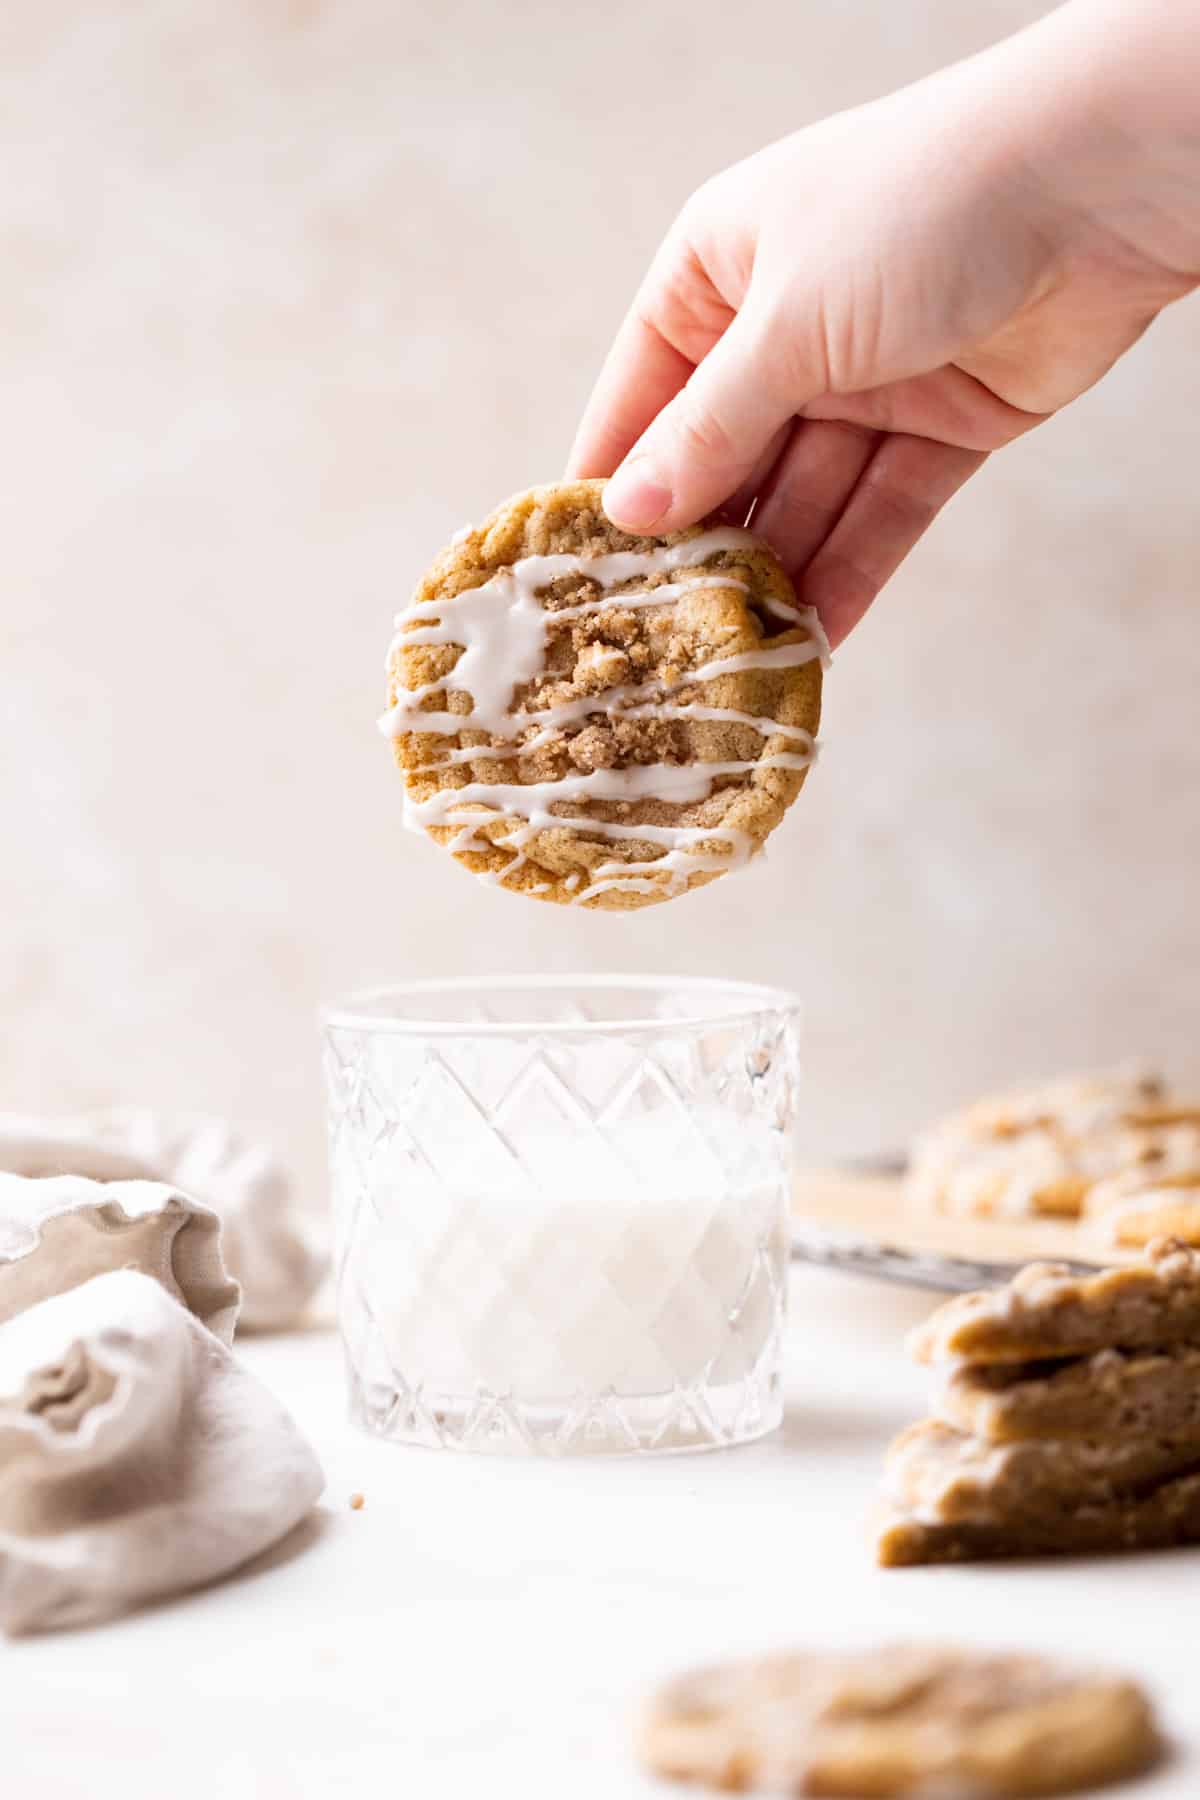 dunking one of the cookies in a glass of milk.